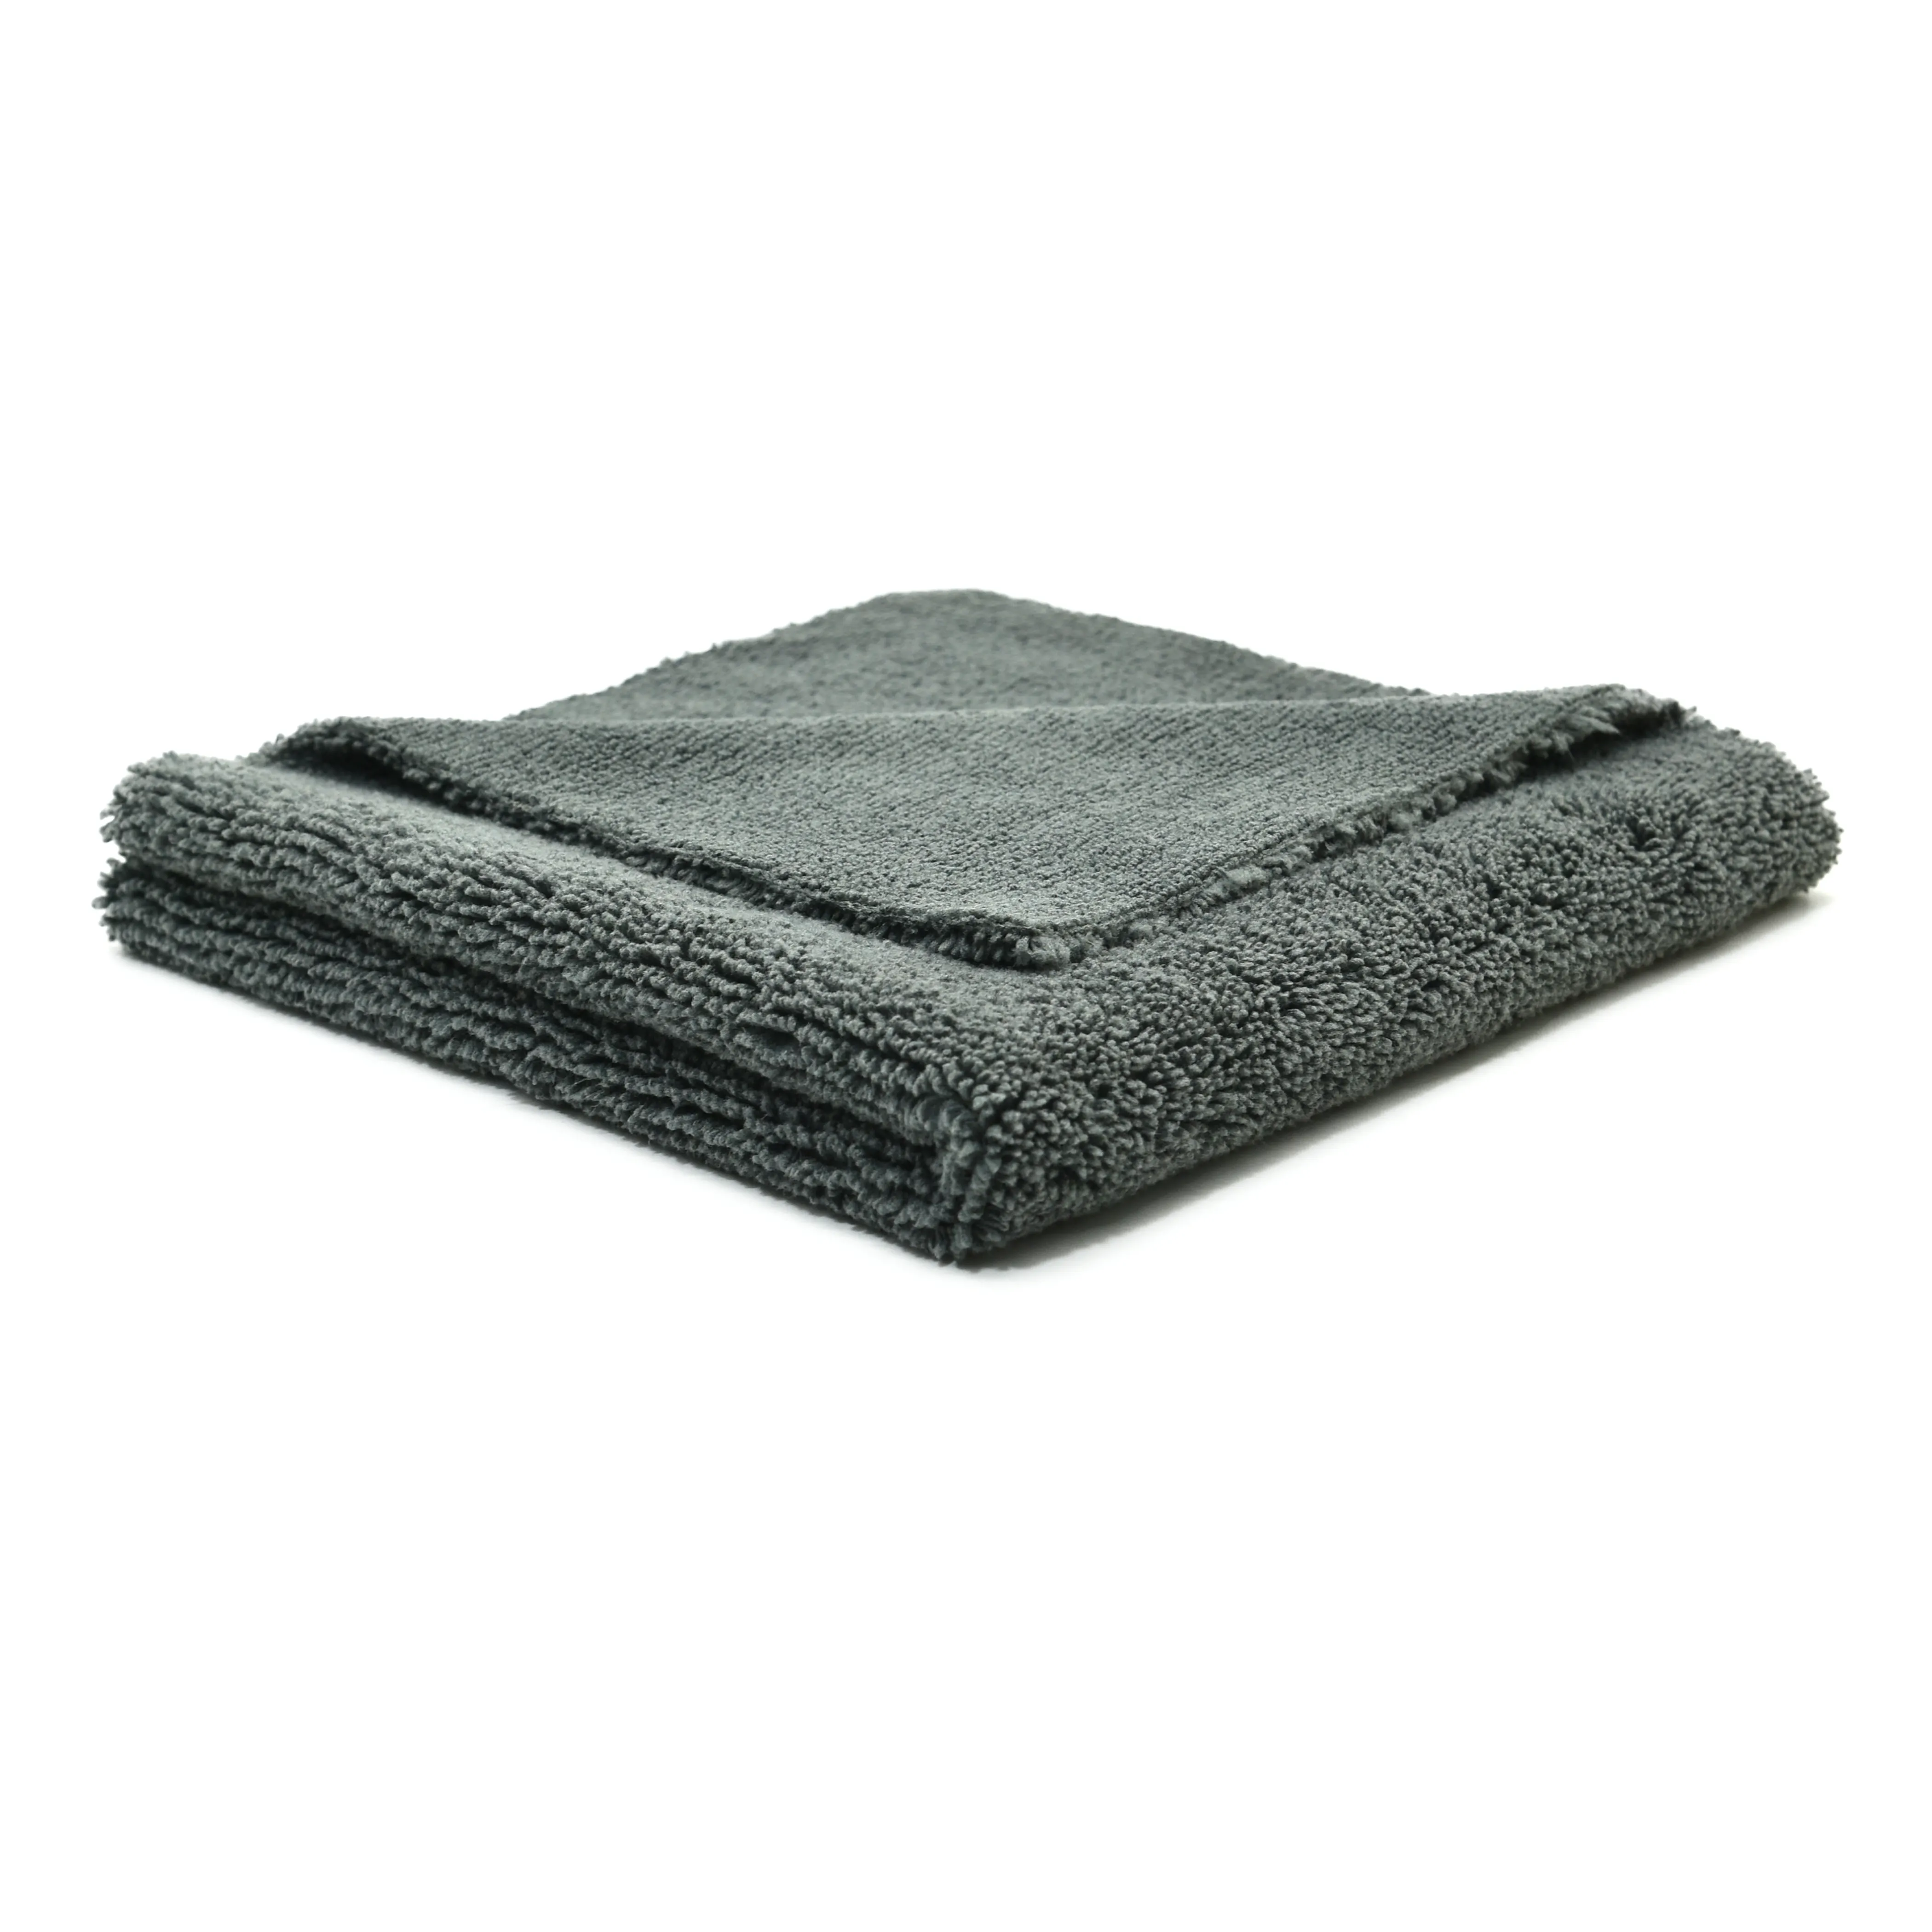 Super Soft Drying Towels Car Detailing Buffing Cloth Scratch-Free Absorbent Microfiber Cleaning Cloths for Cars